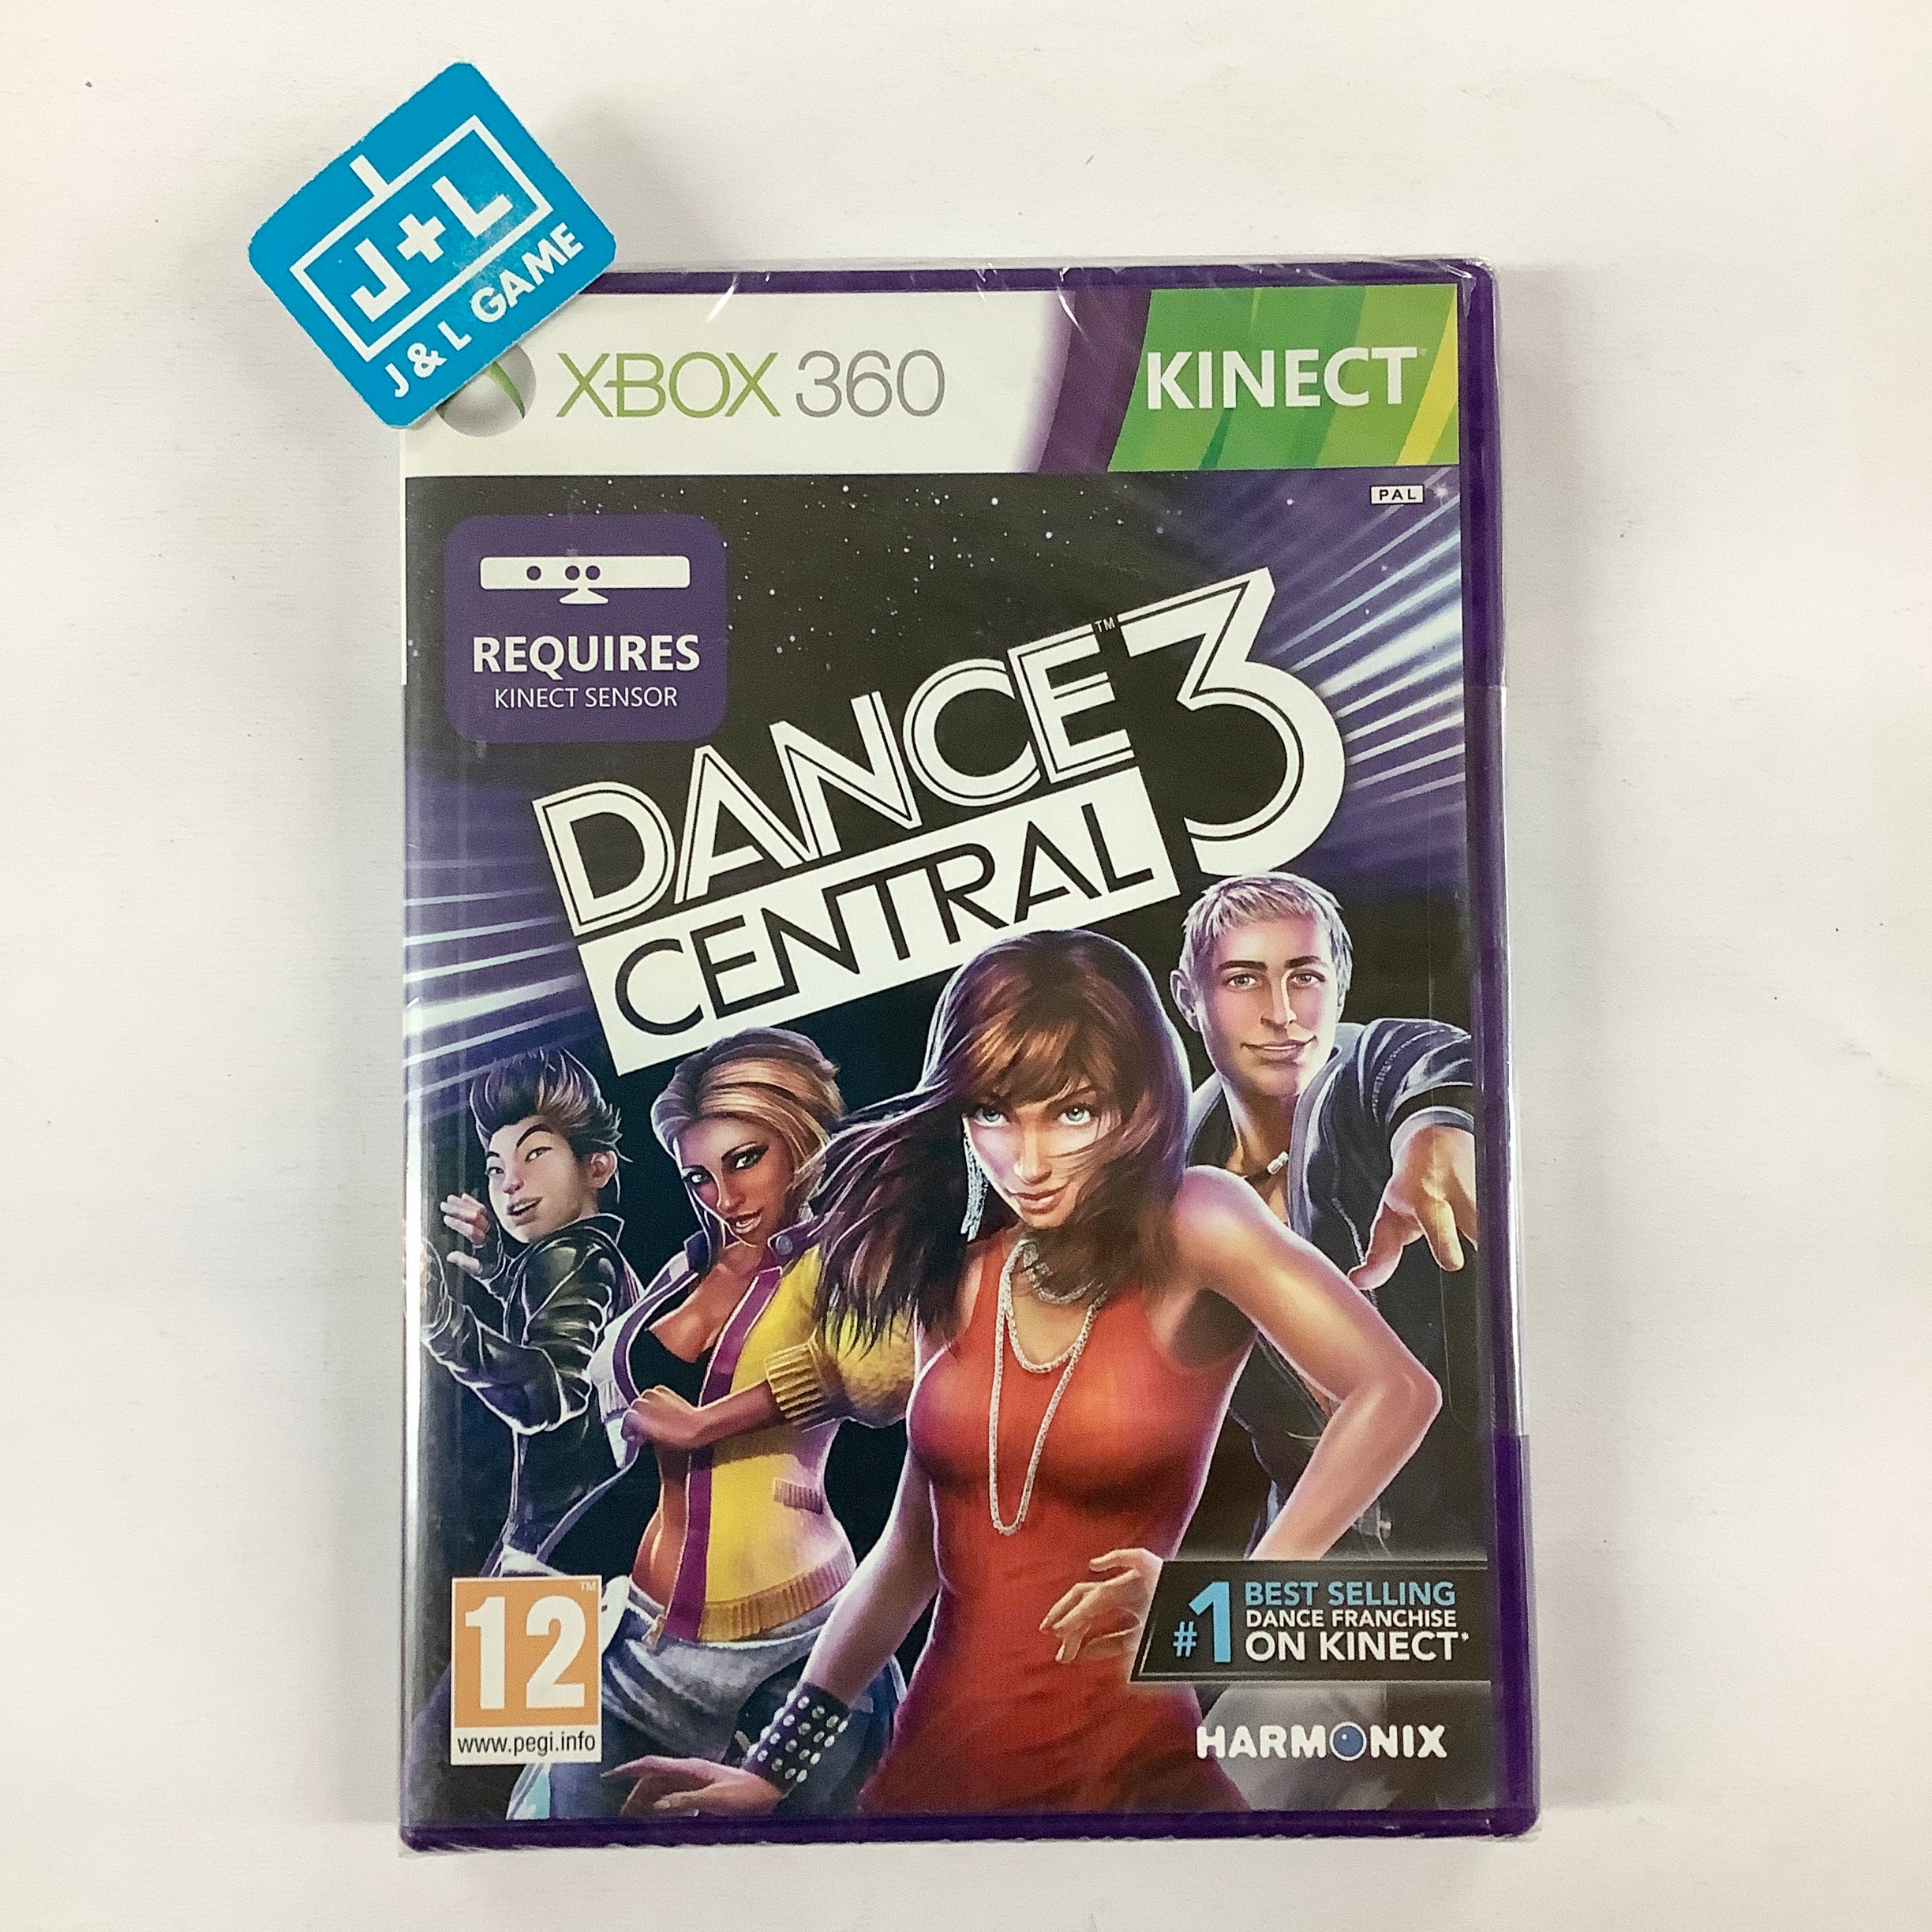 Dance Central 3 (Kinect Required) - Xbox 360 (European Import) Video Games Microsoft   